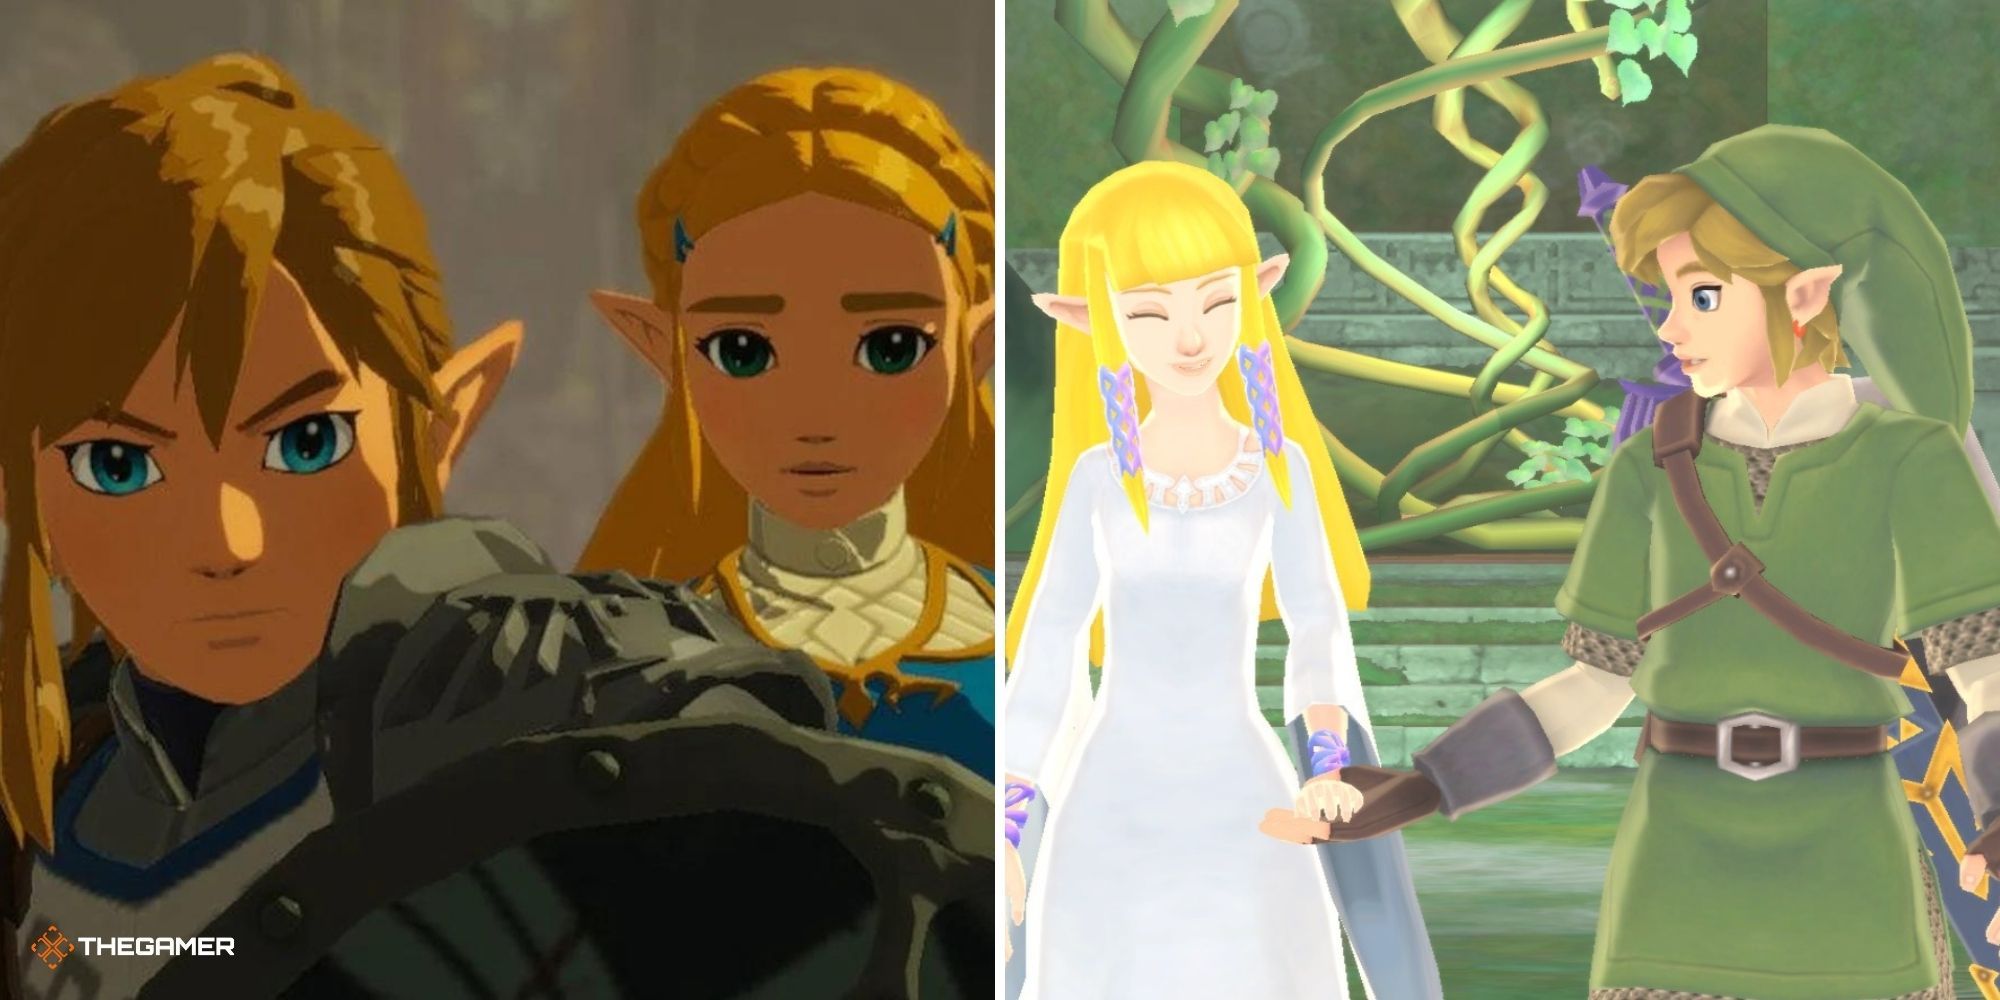 aakash pawar recommends images of link and zelda pic